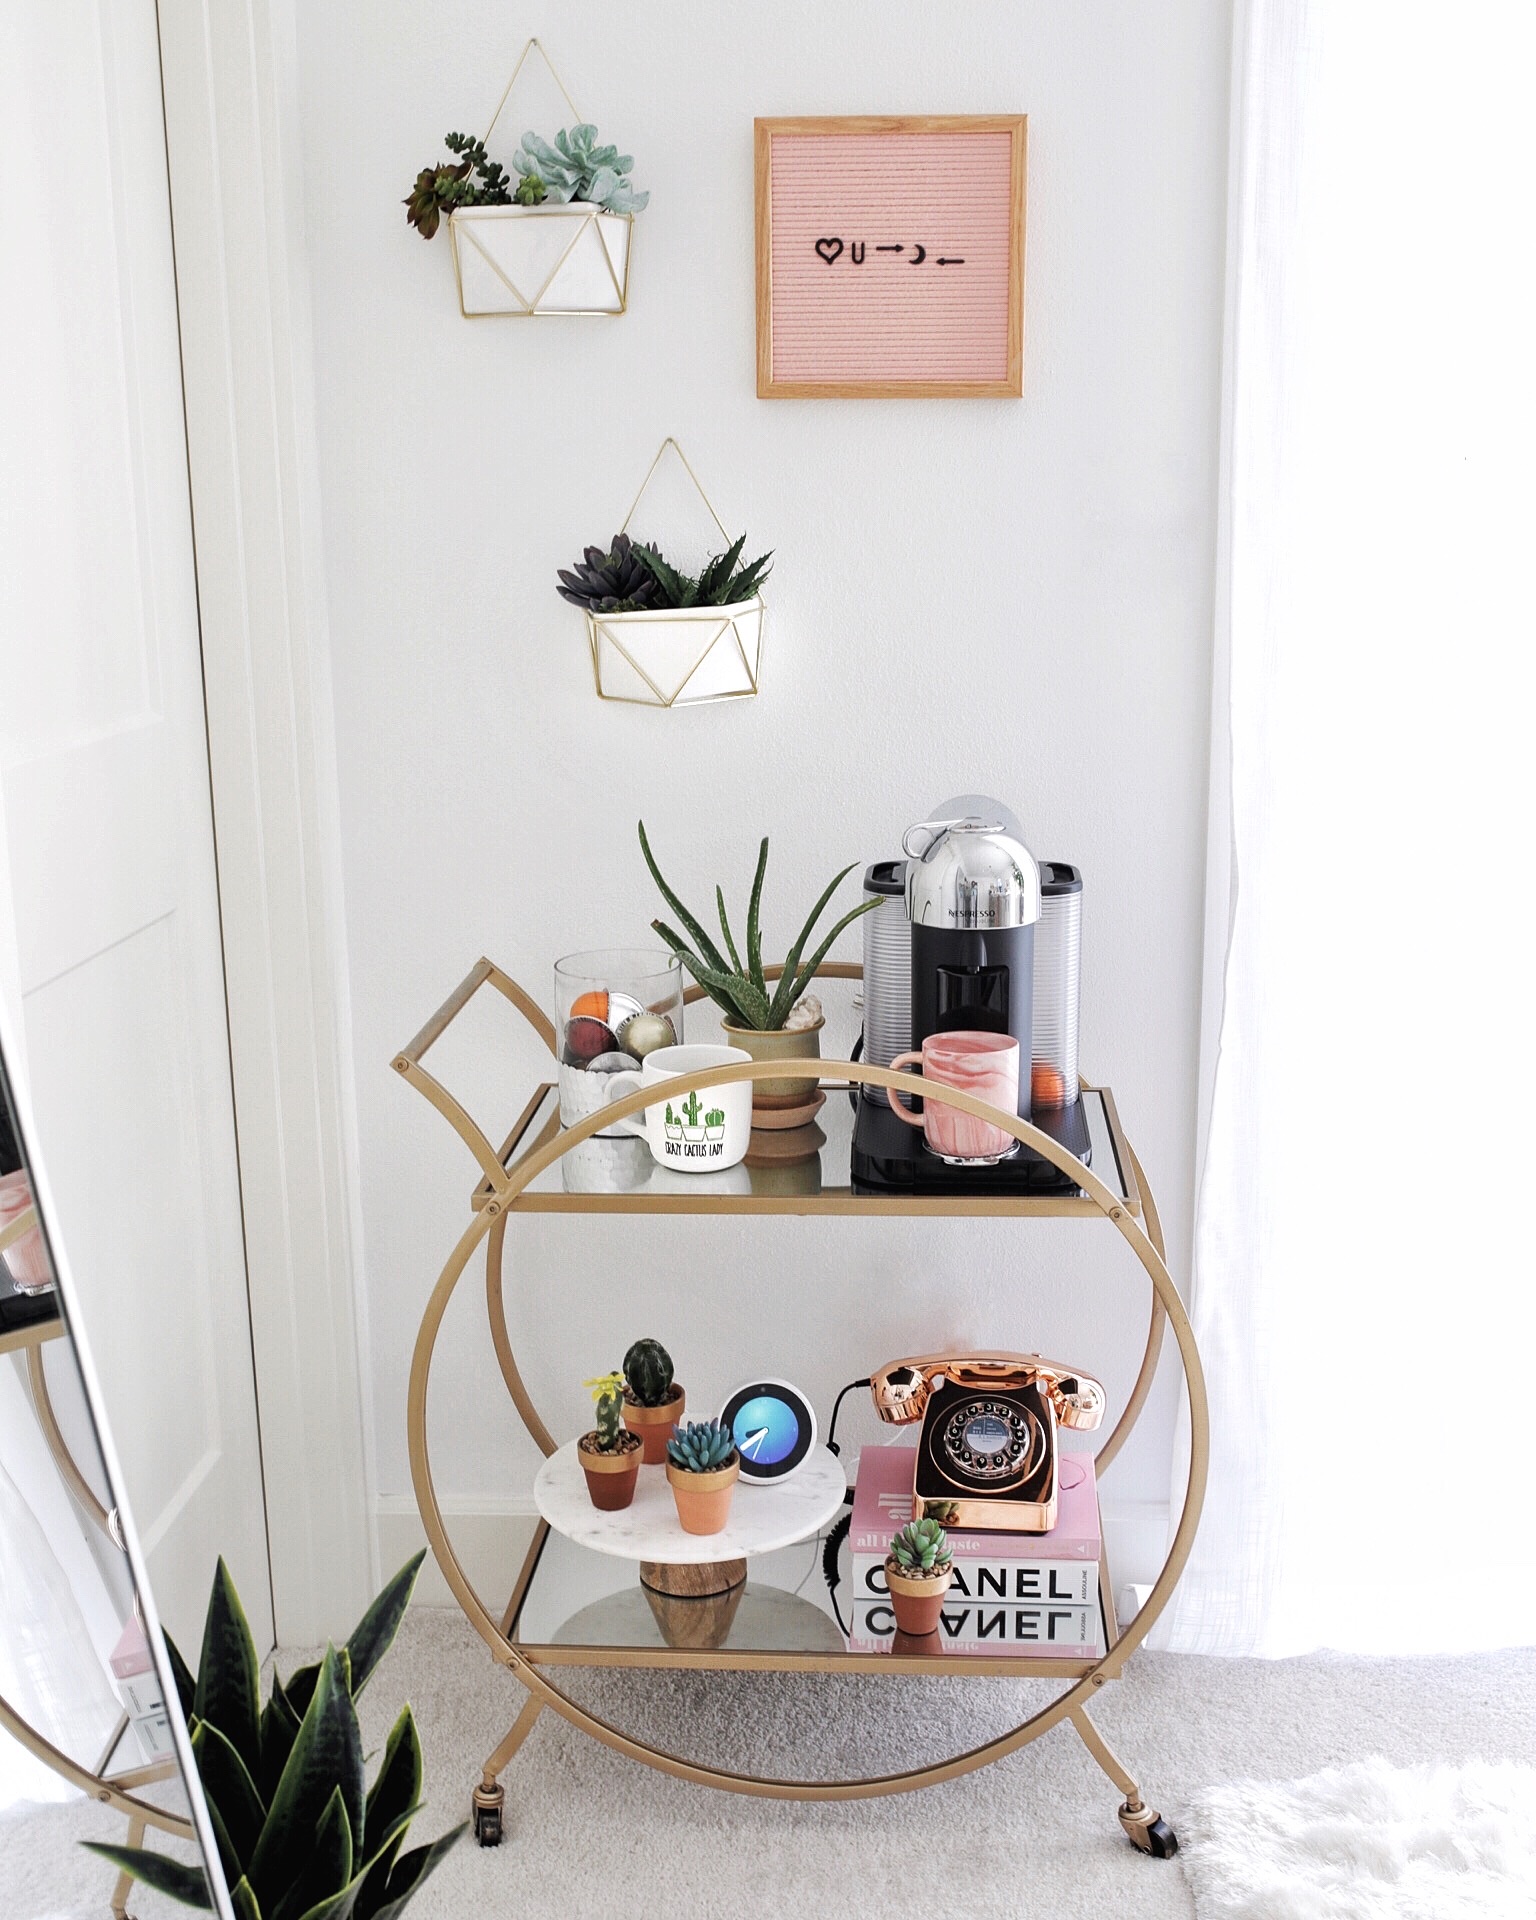 Bar Cart Ideas: How to Style a Bar Cart without alcohol